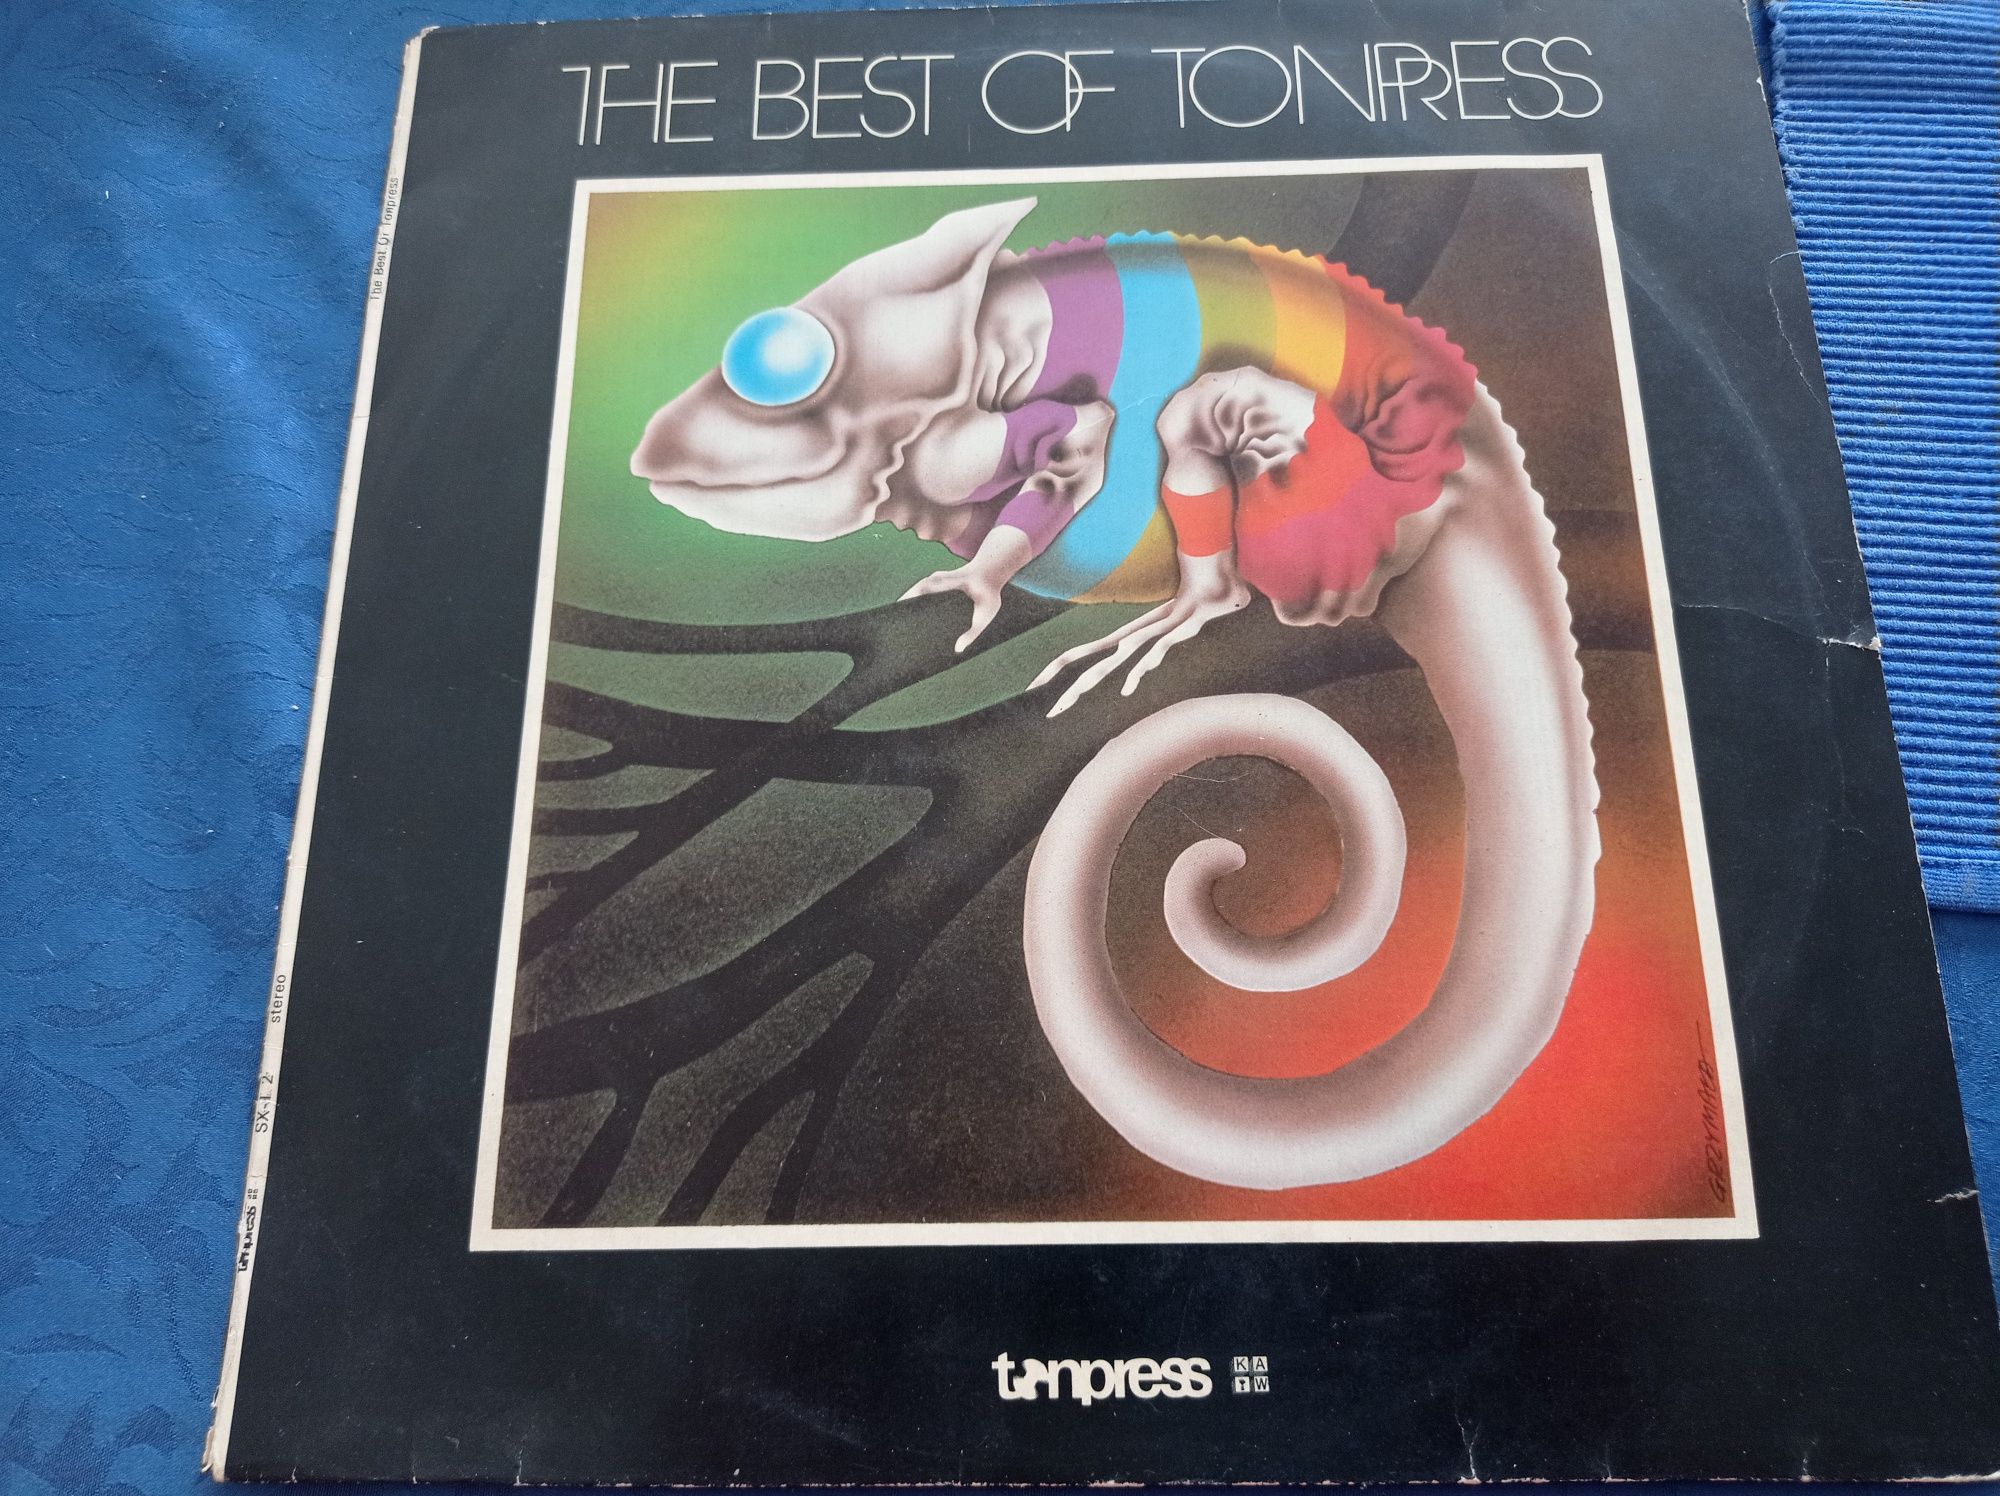 The best of Tonpress